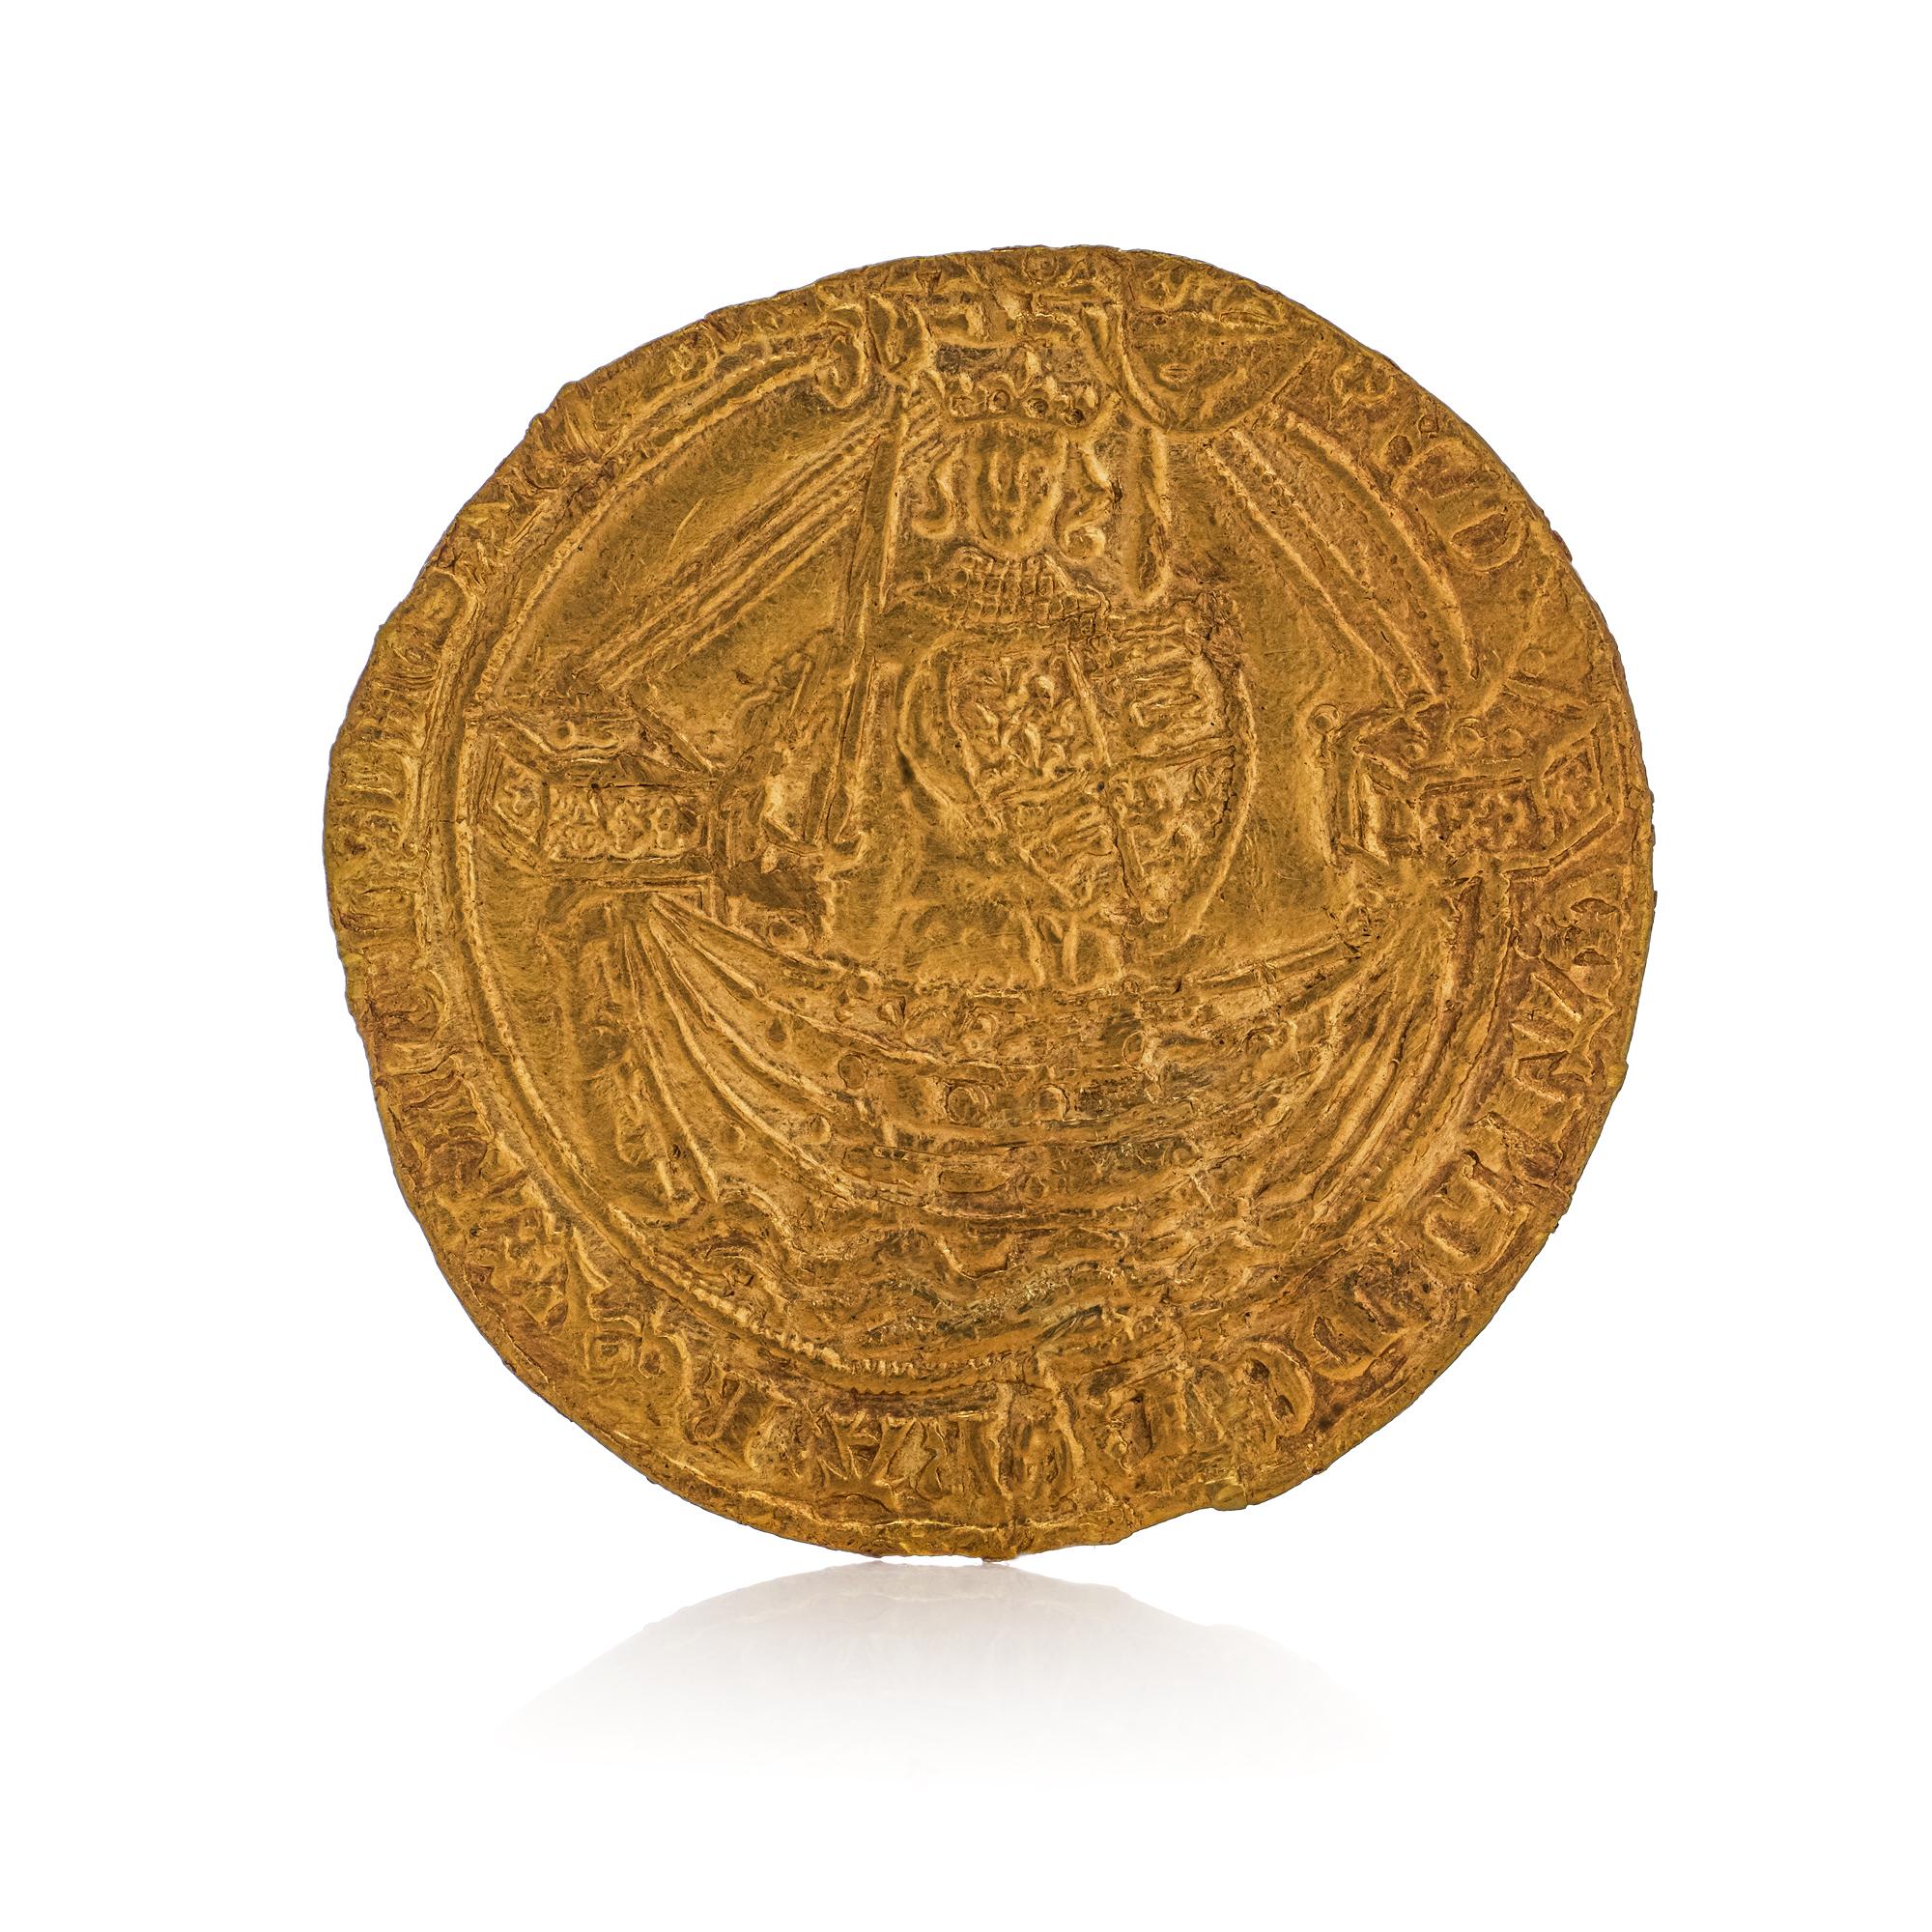 Edward III 1361-1369 Gold Noble Treaty Period 1361 - 1369, London.

Country: England
England

Period: House of Plantagenet
Ruler: Edward III
Phase: treaty period (1361-1369)
Production method: Hammered
METAL: Gold ( 24kt. gold purity )
Denomination: